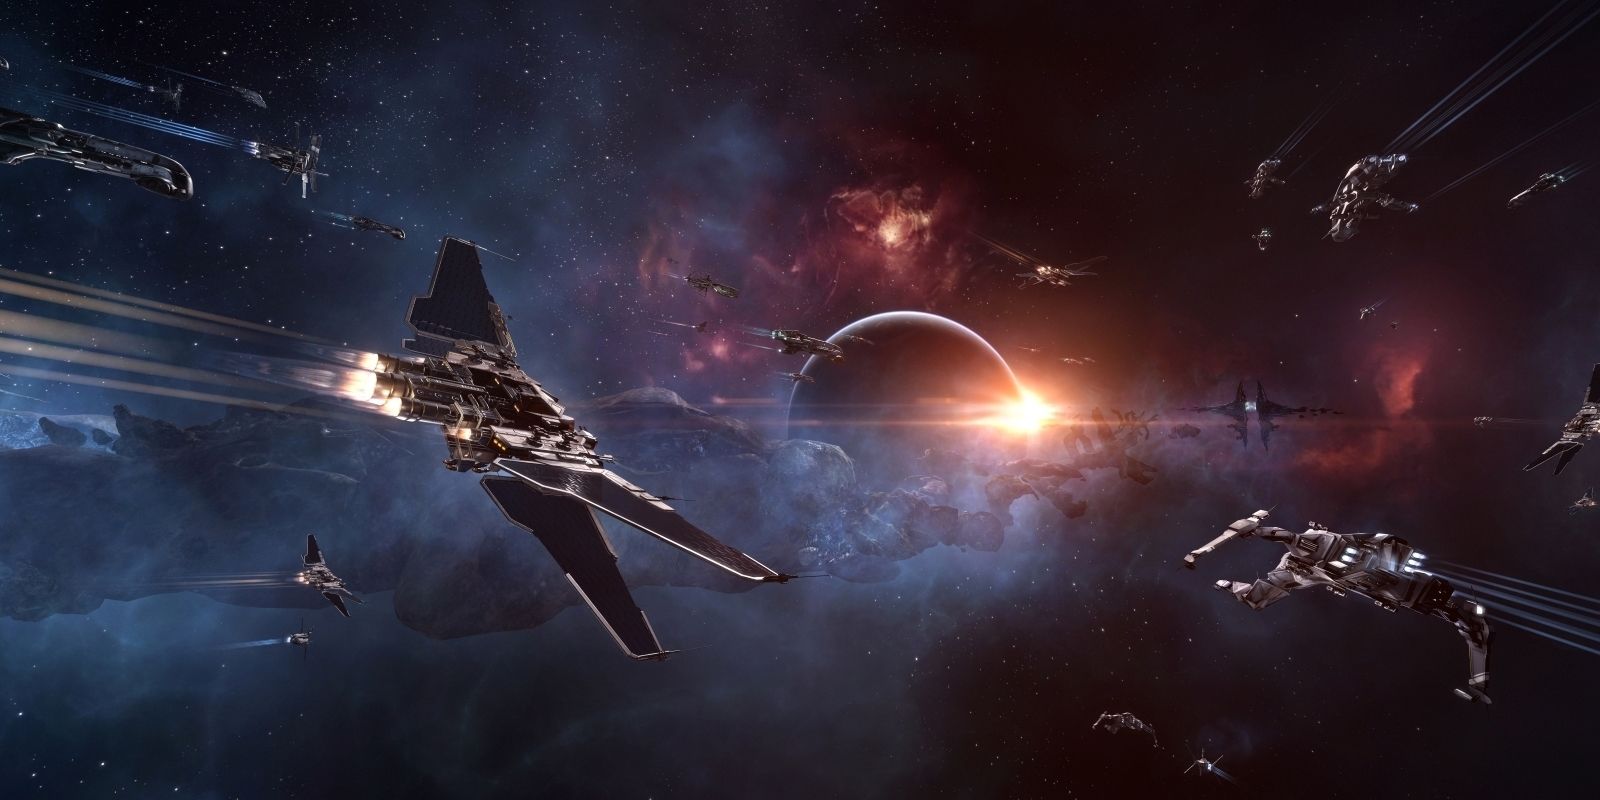 ships in space from eve online